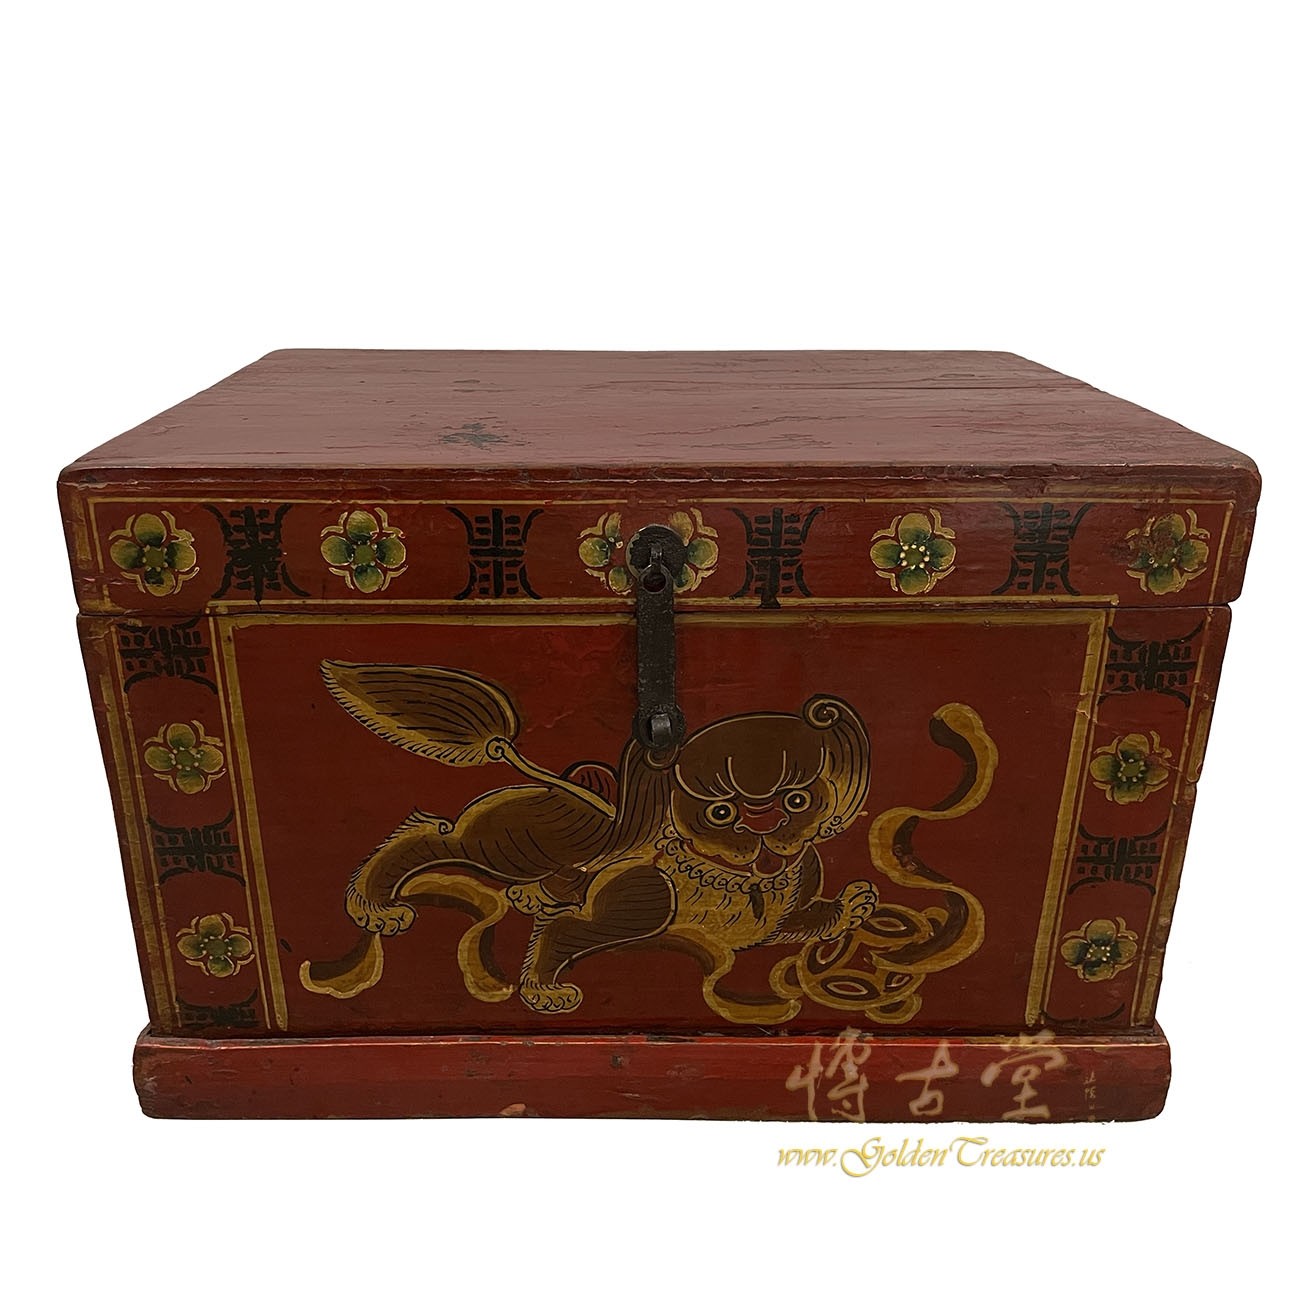 Early 20 Century Antique Chinese Wooden Painted Box